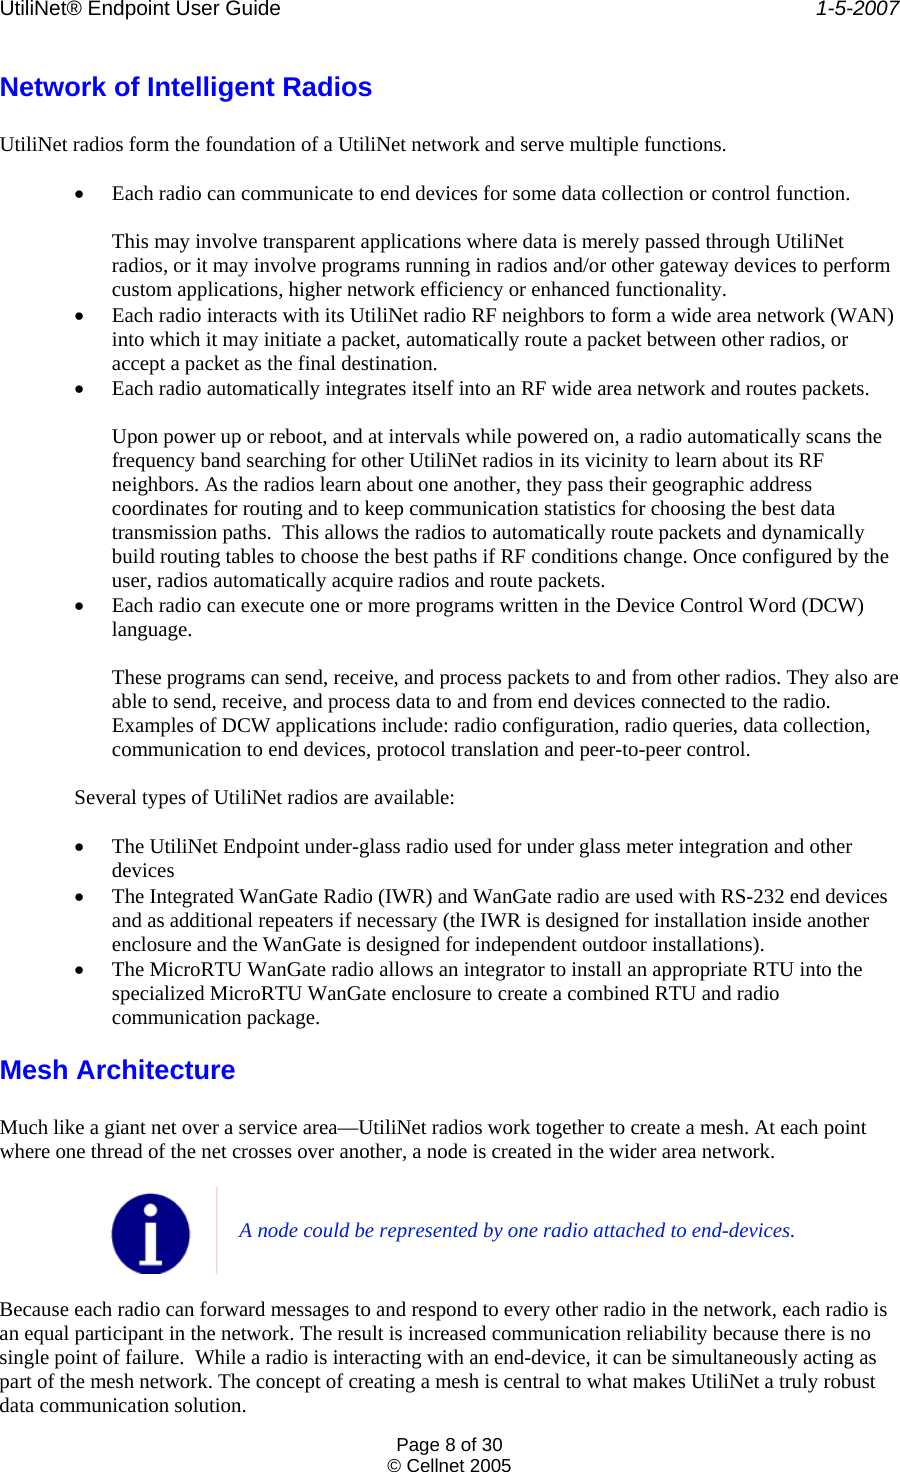 UtiliNet® Endpoint User Guide    1-5-2007 Page 8 of 30 © Cellnet 2005  Network of Intelligent Radios  UtiliNet radios form the foundation of a UtiliNet network and serve multiple functions.  • Each radio can communicate to end devices for some data collection or control function.  This may involve transparent applications where data is merely passed through UtiliNet radios, or it may involve programs running in radios and/or other gateway devices to perform custom applications, higher network efficiency or enhanced functionality. • Each radio interacts with its UtiliNet radio RF neighbors to form a wide area network (WAN) into which it may initiate a packet, automatically route a packet between other radios, or accept a packet as the final destination. • Each radio automatically integrates itself into an RF wide area network and routes packets.  Upon power up or reboot, and at intervals while powered on, a radio automatically scans the frequency band searching for other UtiliNet radios in its vicinity to learn about its RF neighbors. As the radios learn about one another, they pass their geographic address coordinates for routing and to keep communication statistics for choosing the best data transmission paths.  This allows the radios to automatically route packets and dynamically build routing tables to choose the best paths if RF conditions change. Once configured by the user, radios automatically acquire radios and route packets. • Each radio can execute one or more programs written in the Device Control Word (DCW) language.  These programs can send, receive, and process packets to and from other radios. They also are able to send, receive, and process data to and from end devices connected to the radio. Examples of DCW applications include: radio configuration, radio queries, data collection, communication to end devices, protocol translation and peer-to-peer control.  Several types of UtiliNet radios are available:  • The UtiliNet Endpoint under-glass radio used for under glass meter integration and other devices • The Integrated WanGate Radio (IWR) and WanGate radio are used with RS-232 end devices and as additional repeaters if necessary (the IWR is designed for installation inside another enclosure and the WanGate is designed for independent outdoor installations). • The MicroRTU WanGate radio allows an integrator to install an appropriate RTU into the specialized MicroRTU WanGate enclosure to create a combined RTU and radio communication package. Mesh Architecture  Much like a giant net over a service area—UtiliNet radios work together to create a mesh. At each point where one thread of the net crosses over another, a node is created in the wider area network.   A node could be represented by one radio attached to end-devices.  Because each radio can forward messages to and respond to every other radio in the network, each radio is an equal participant in the network. The result is increased communication reliability because there is no single point of failure.  While a radio is interacting with an end-device, it can be simultaneously acting as part of the mesh network. The concept of creating a mesh is central to what makes UtiliNet a truly robust data communication solution. 